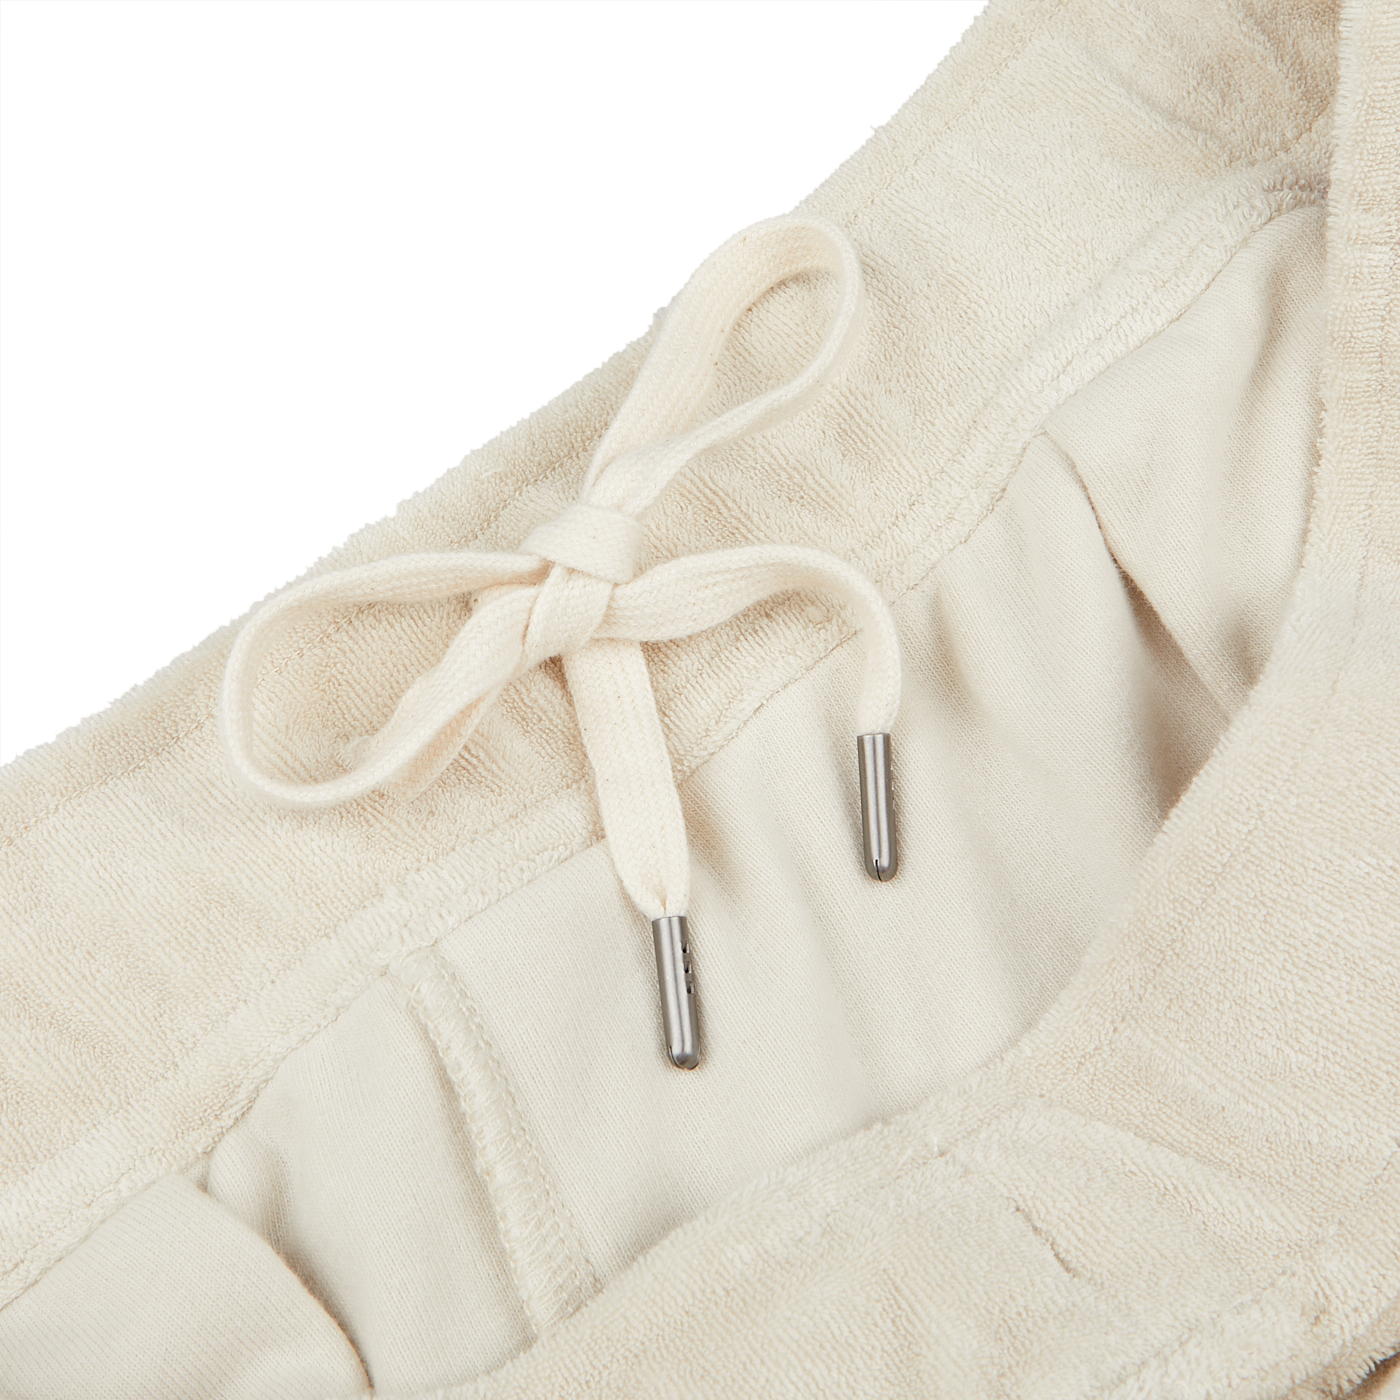 Close-up image of a beige garment, Cream Beige Cotton Towelling Shorts made from a soft towelling cotton blend by Paige, with an adjustable drawstring waist featuring metal aglets.